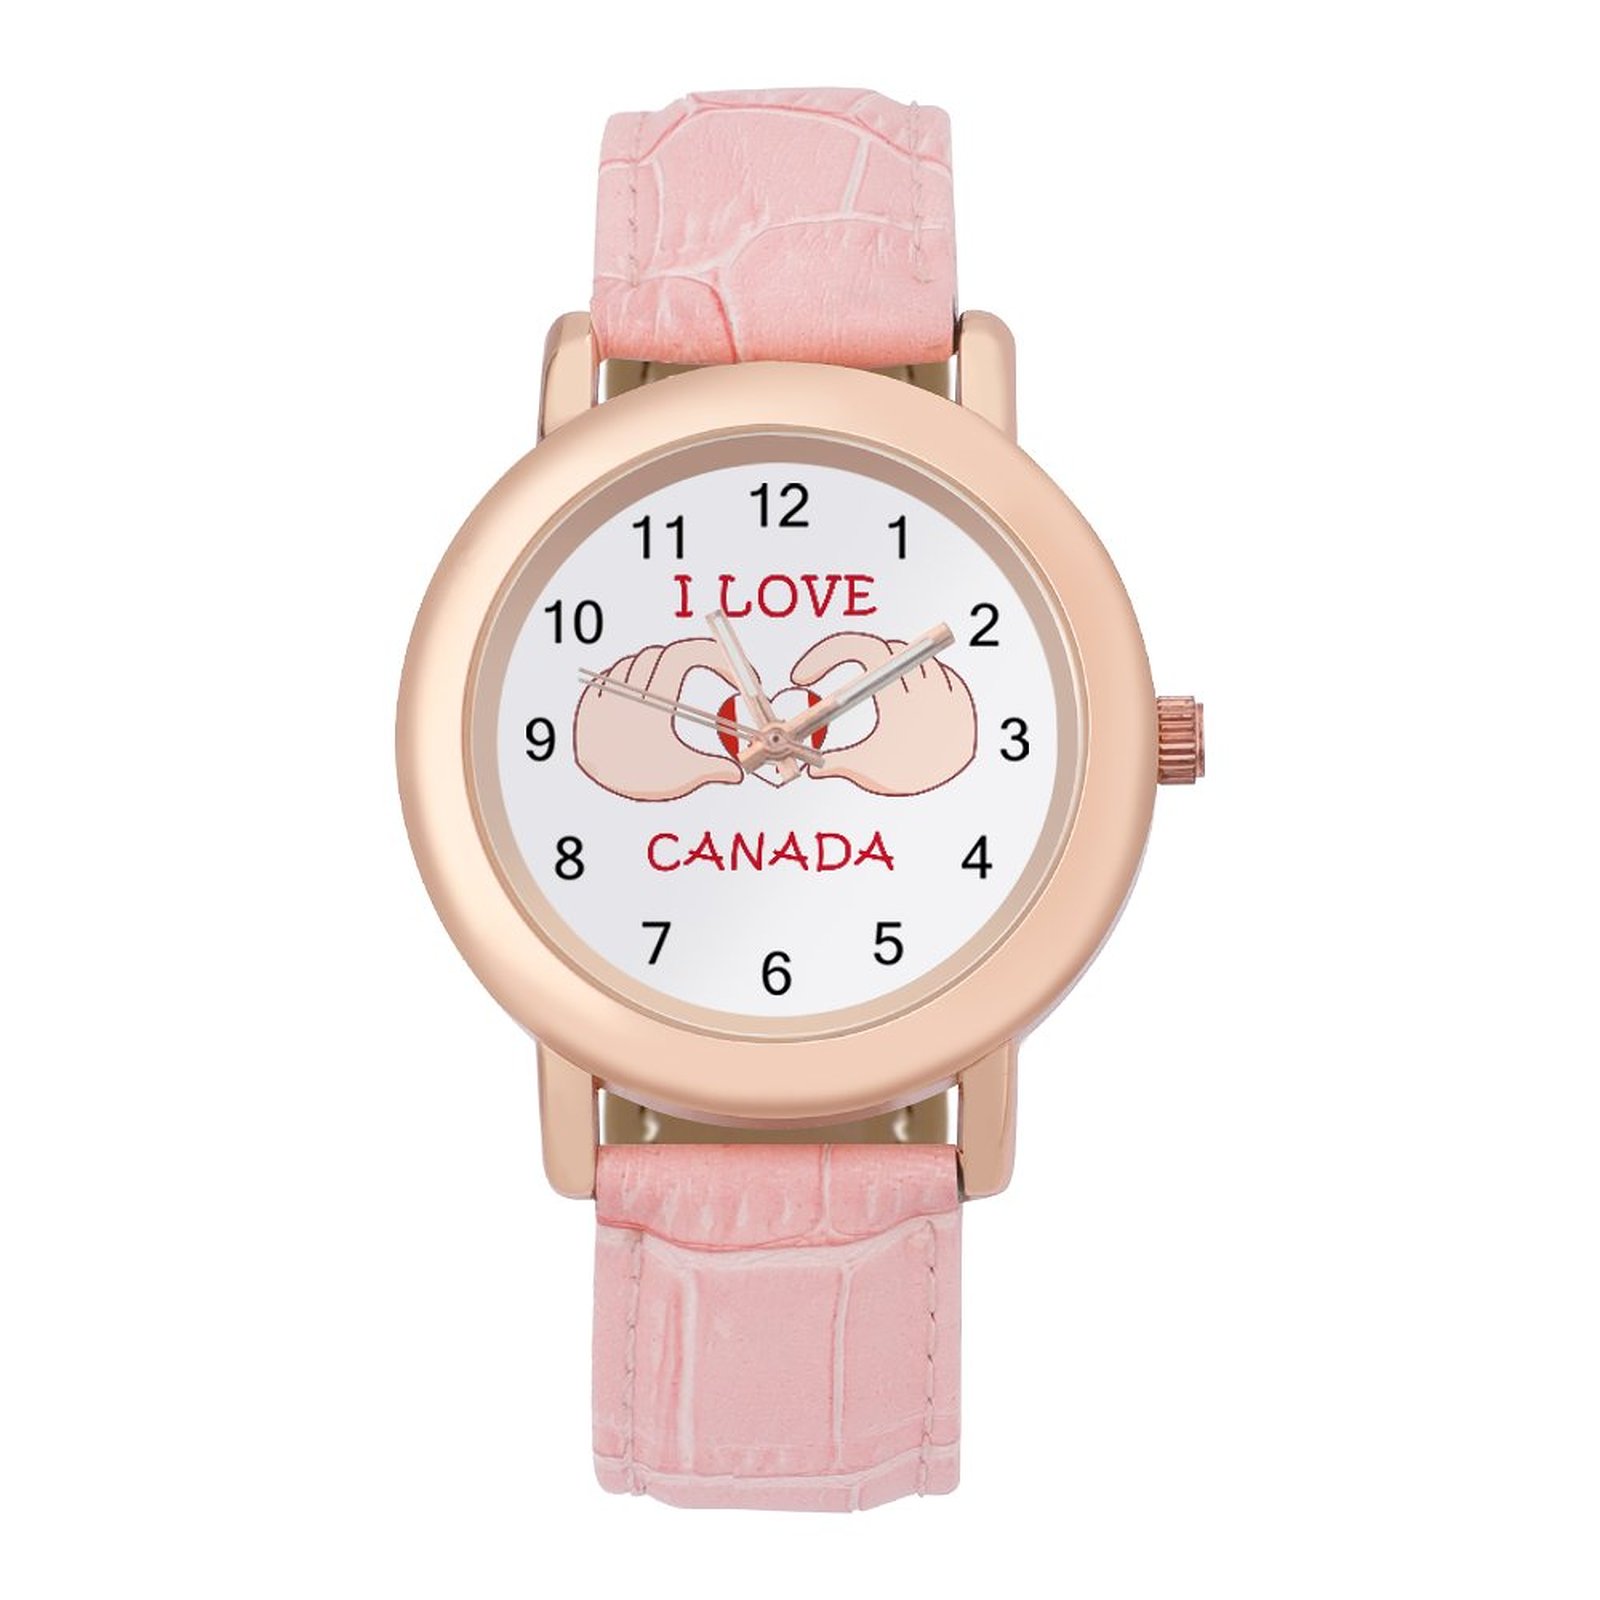 I Love Canada Women's Leather Strap Watch